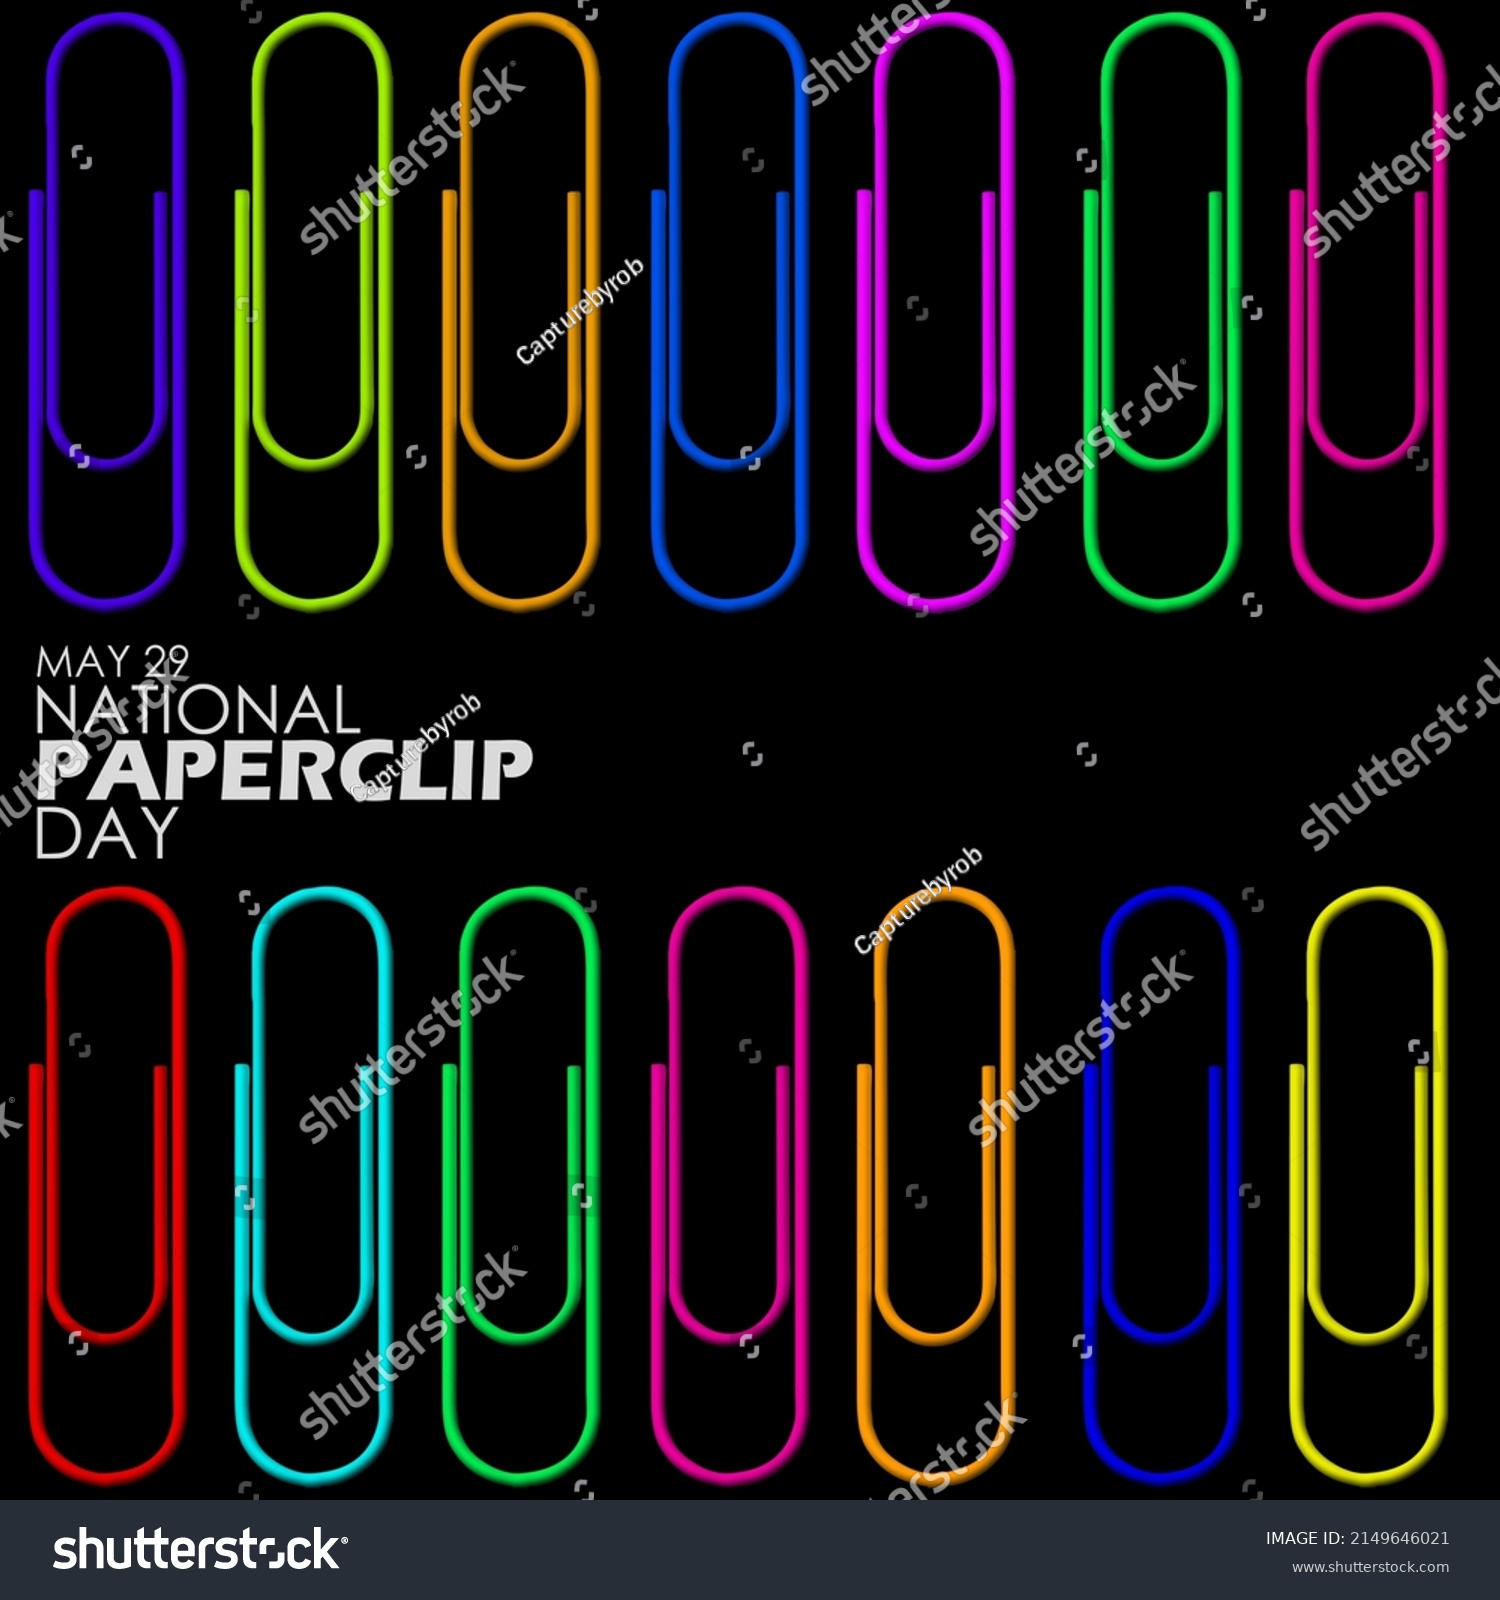 SVG of Paperclip with various colors neatly arranged on black background with bold texts, National Paperclip Day May 29 svg